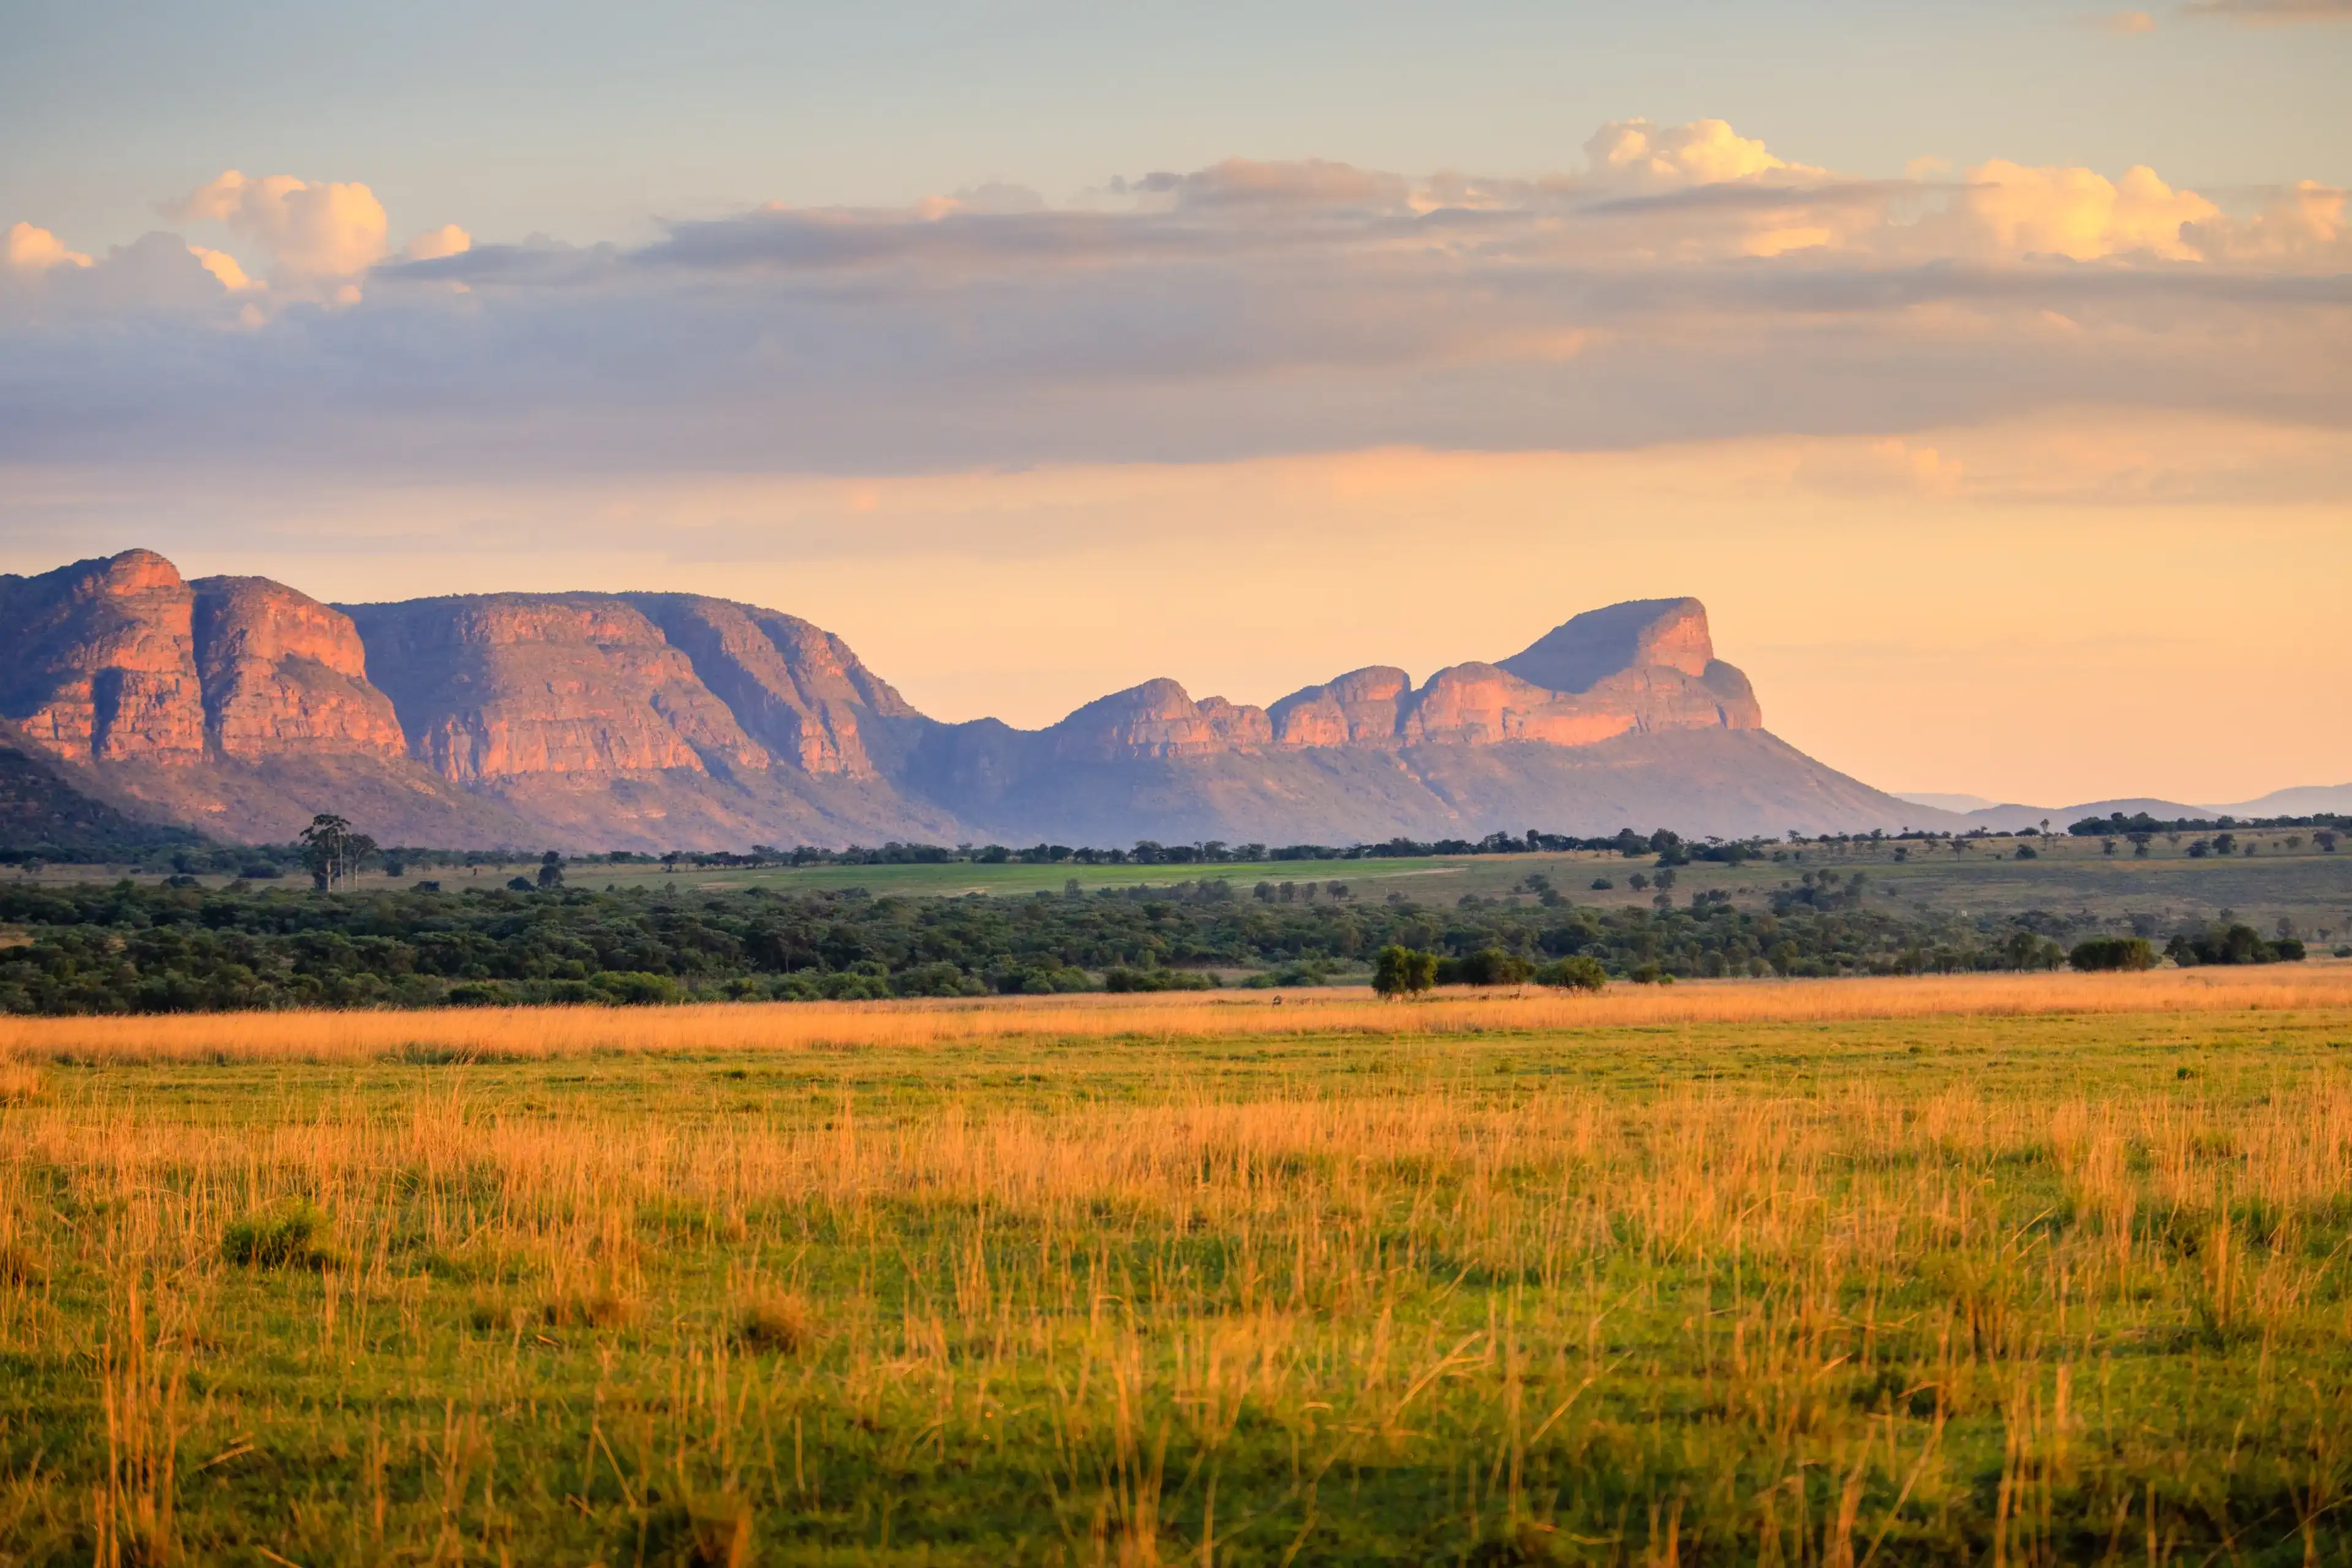 Sunrise over the waterberg mountains, limpopo province, South Africa